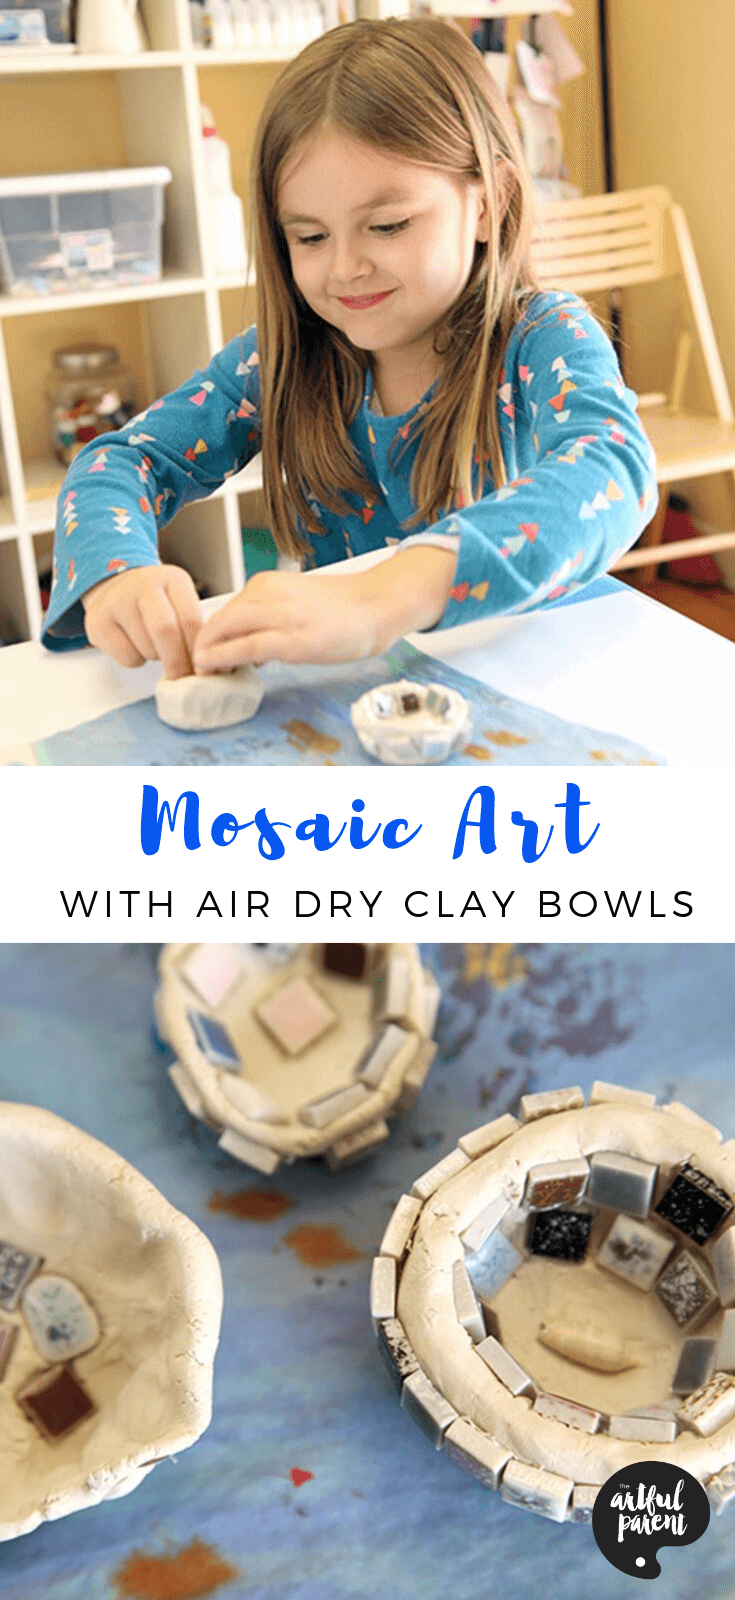 Try making a mosaic tiled bowl or object using upcycled materials and air dry clay. A great tactile mosaic art project for kids! #preschoolers #toddlers #kidsart #artsandcrafts #artforkids #sensory #kidsclayart